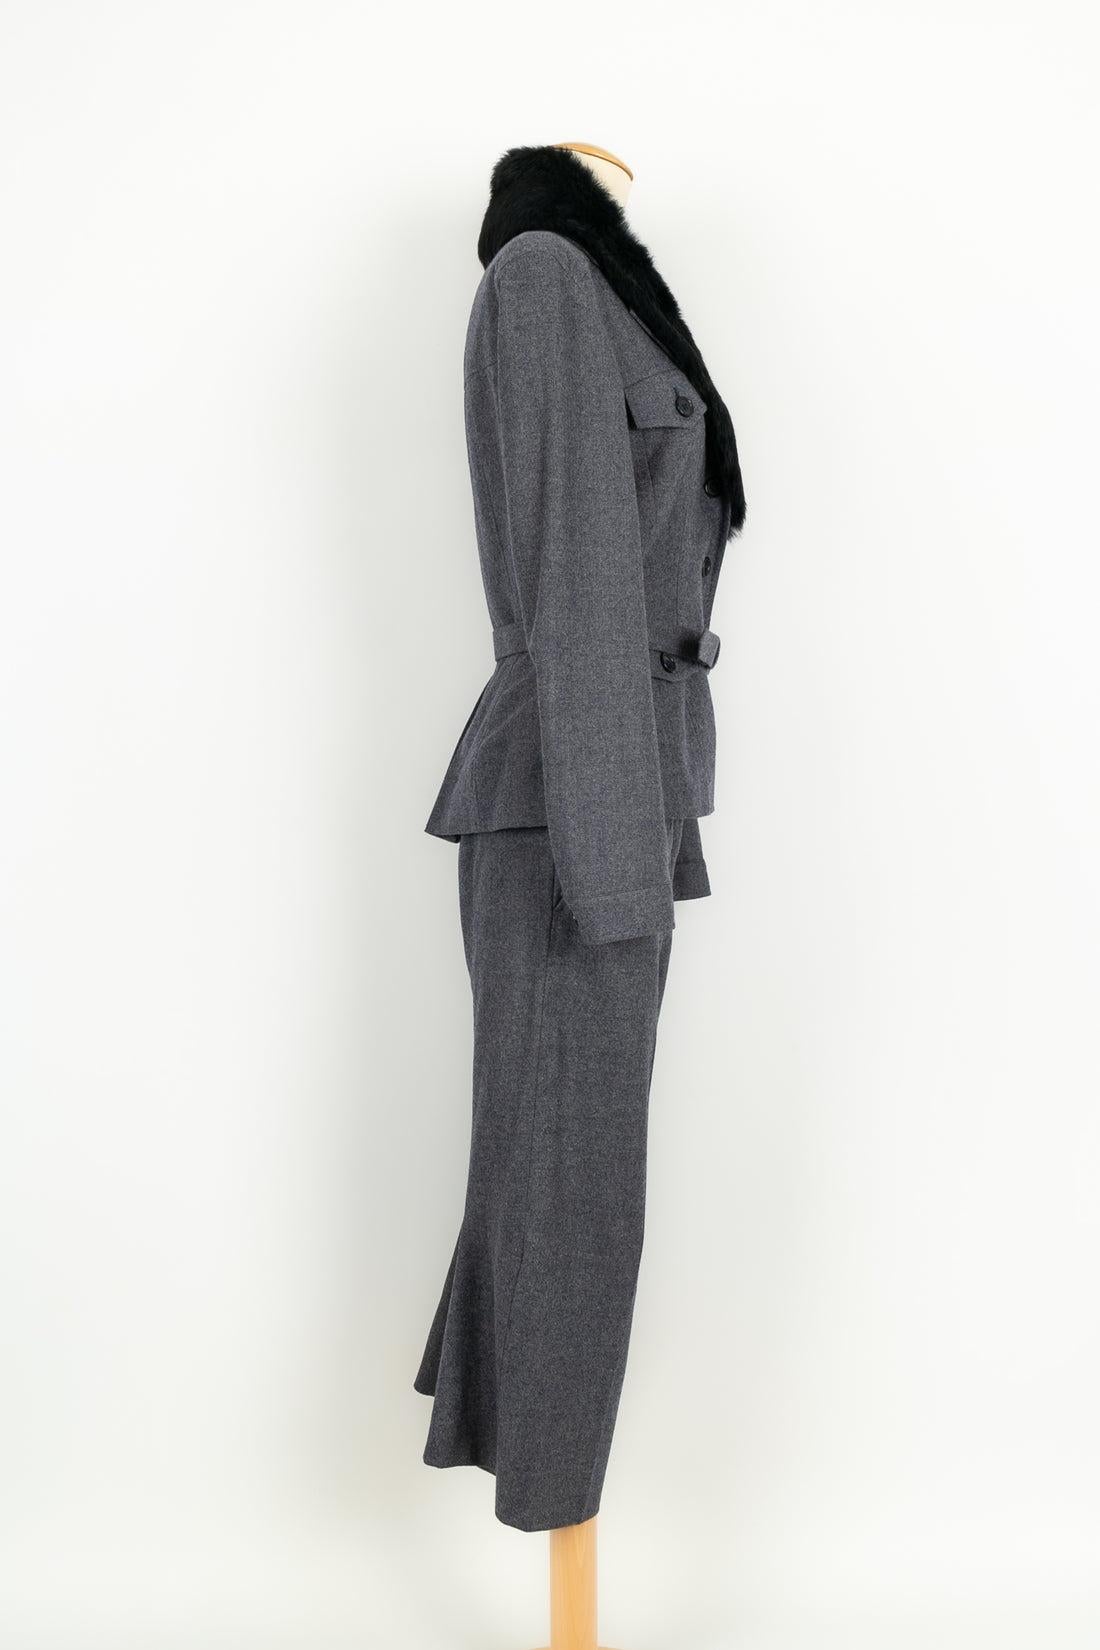 Alexander McQueen Jacket, Skirt and Wool Pants 3 Pieces Set In Excellent Condition For Sale In SAINT-OUEN-SUR-SEINE, FR